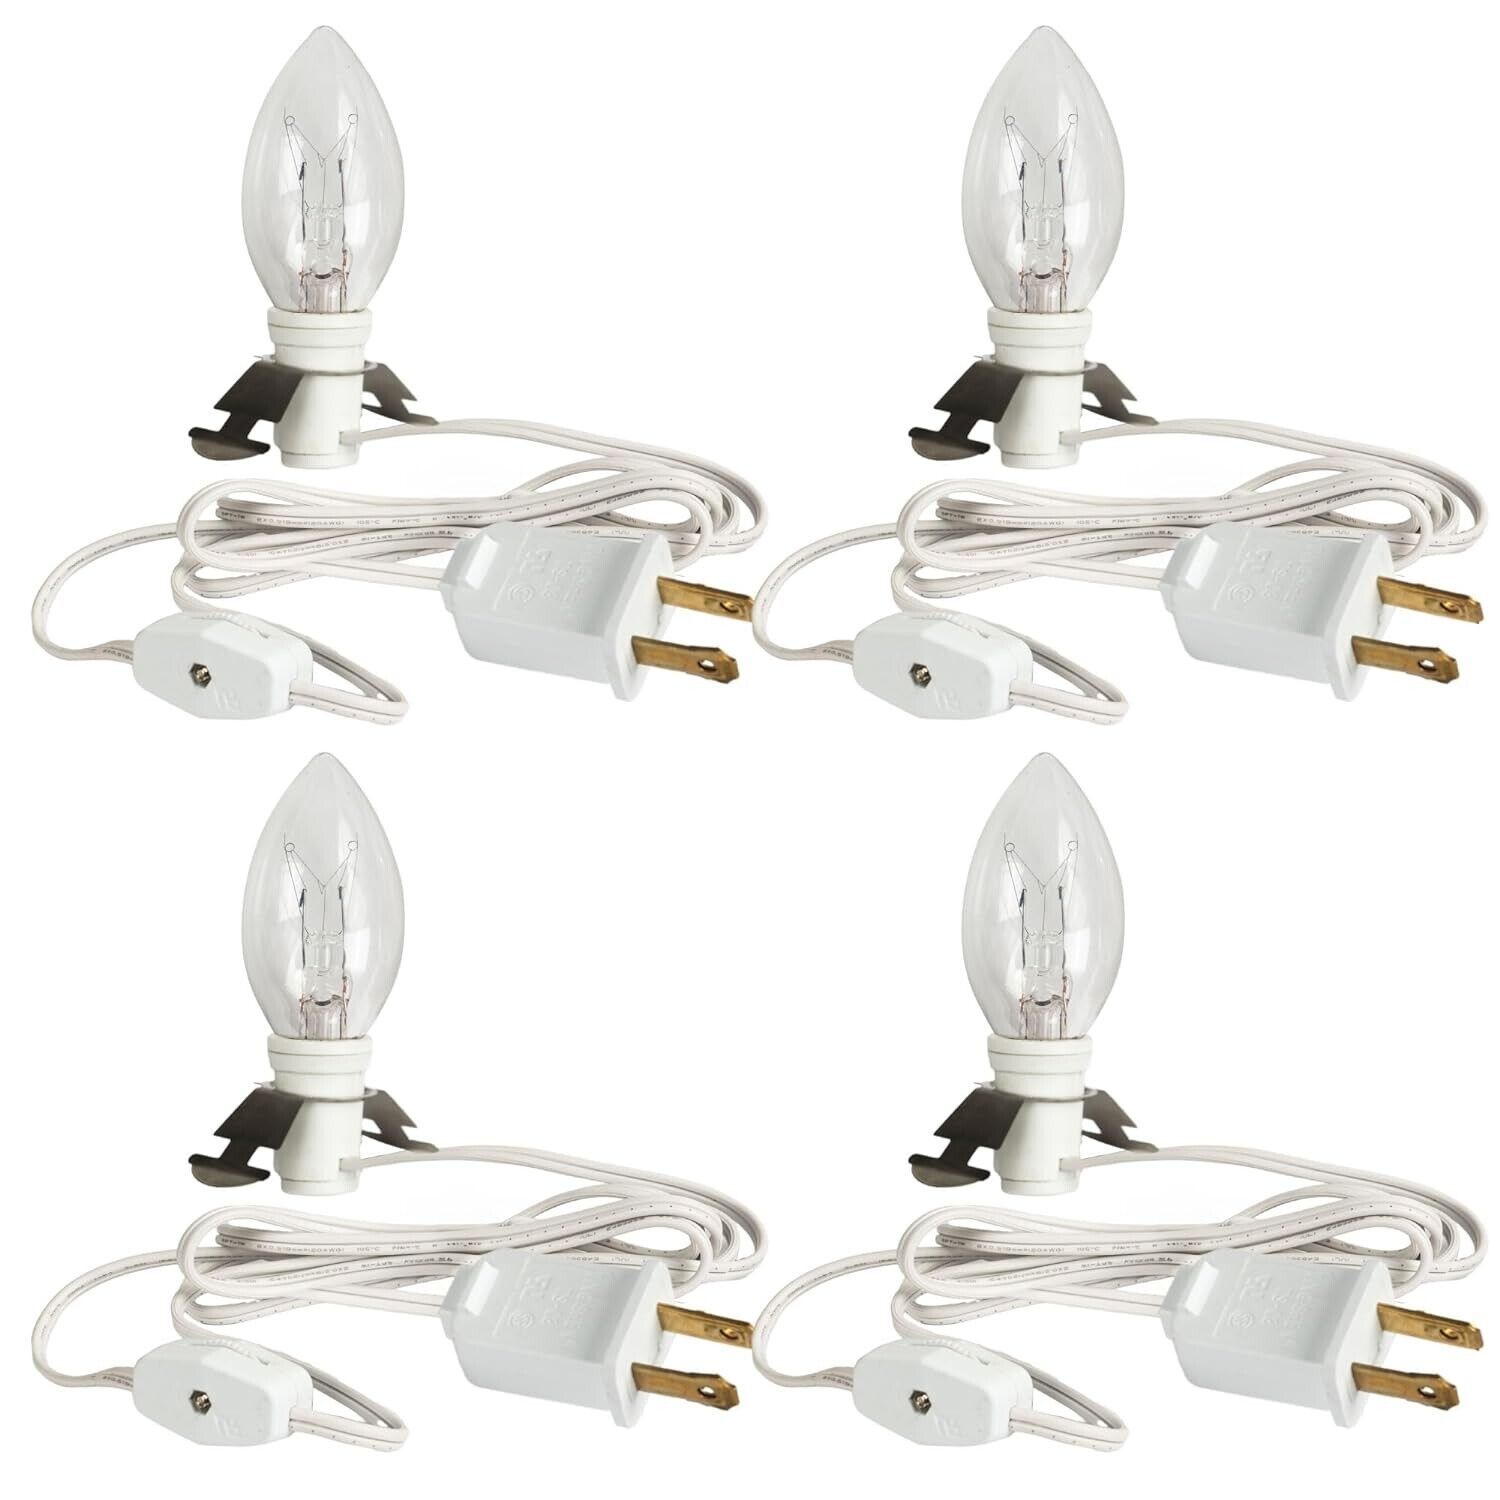 Christmas Village Lighting-Incandescent Bulb-6 FT Accessory Cord w/On/off Switch